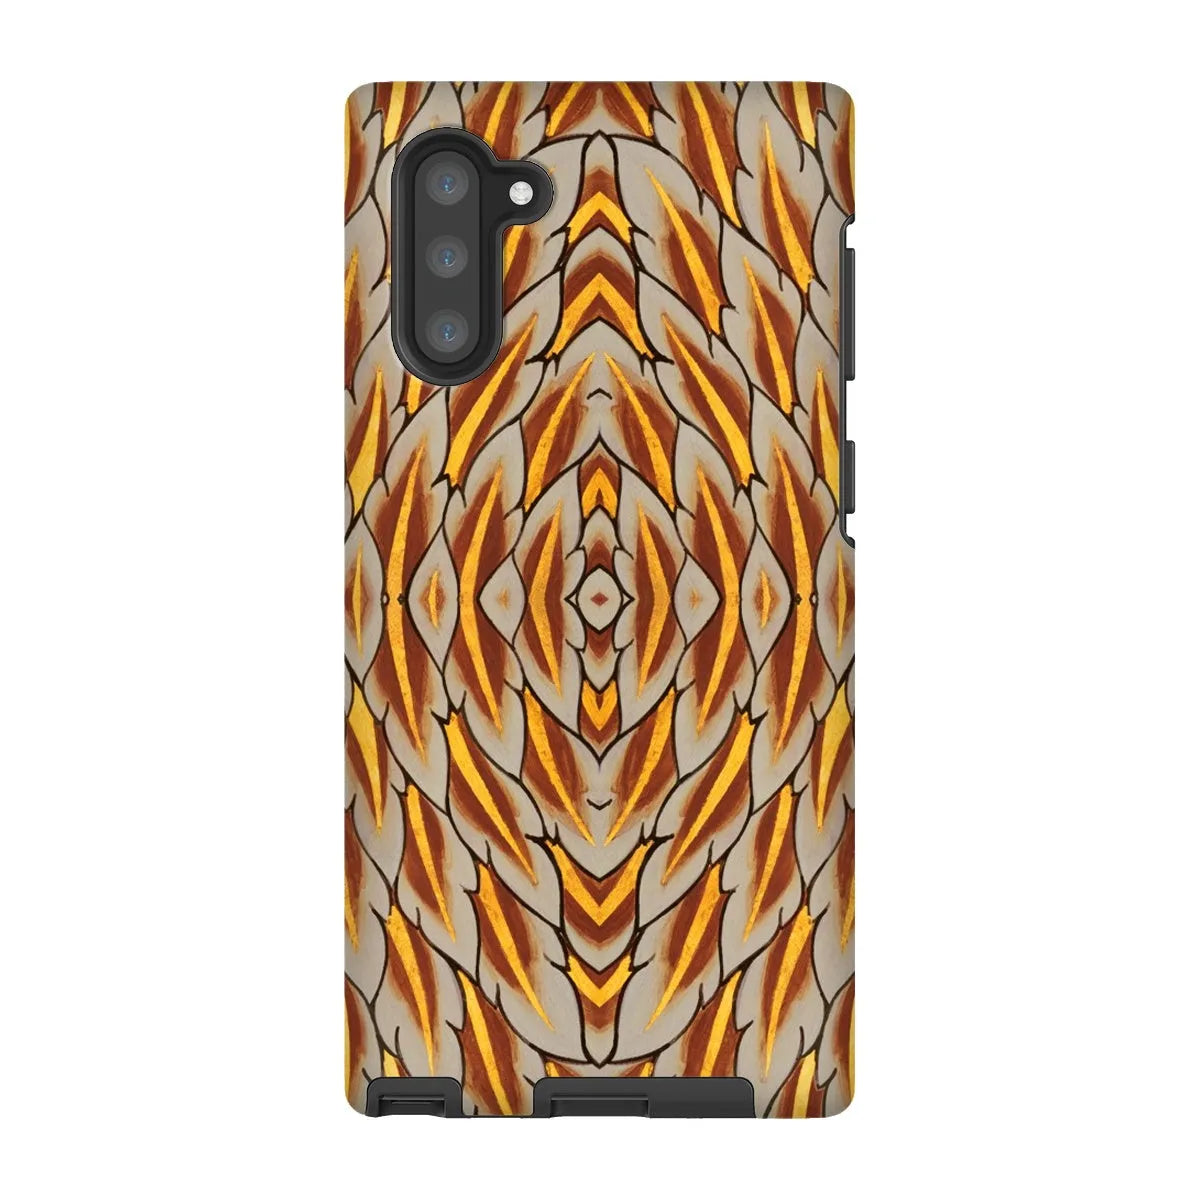 Featherweight Champion Thai Aesthetic Art Phone Case - Samsung Galaxy Note 10 / Matte - Mobile Phone Cases - Aesthetic